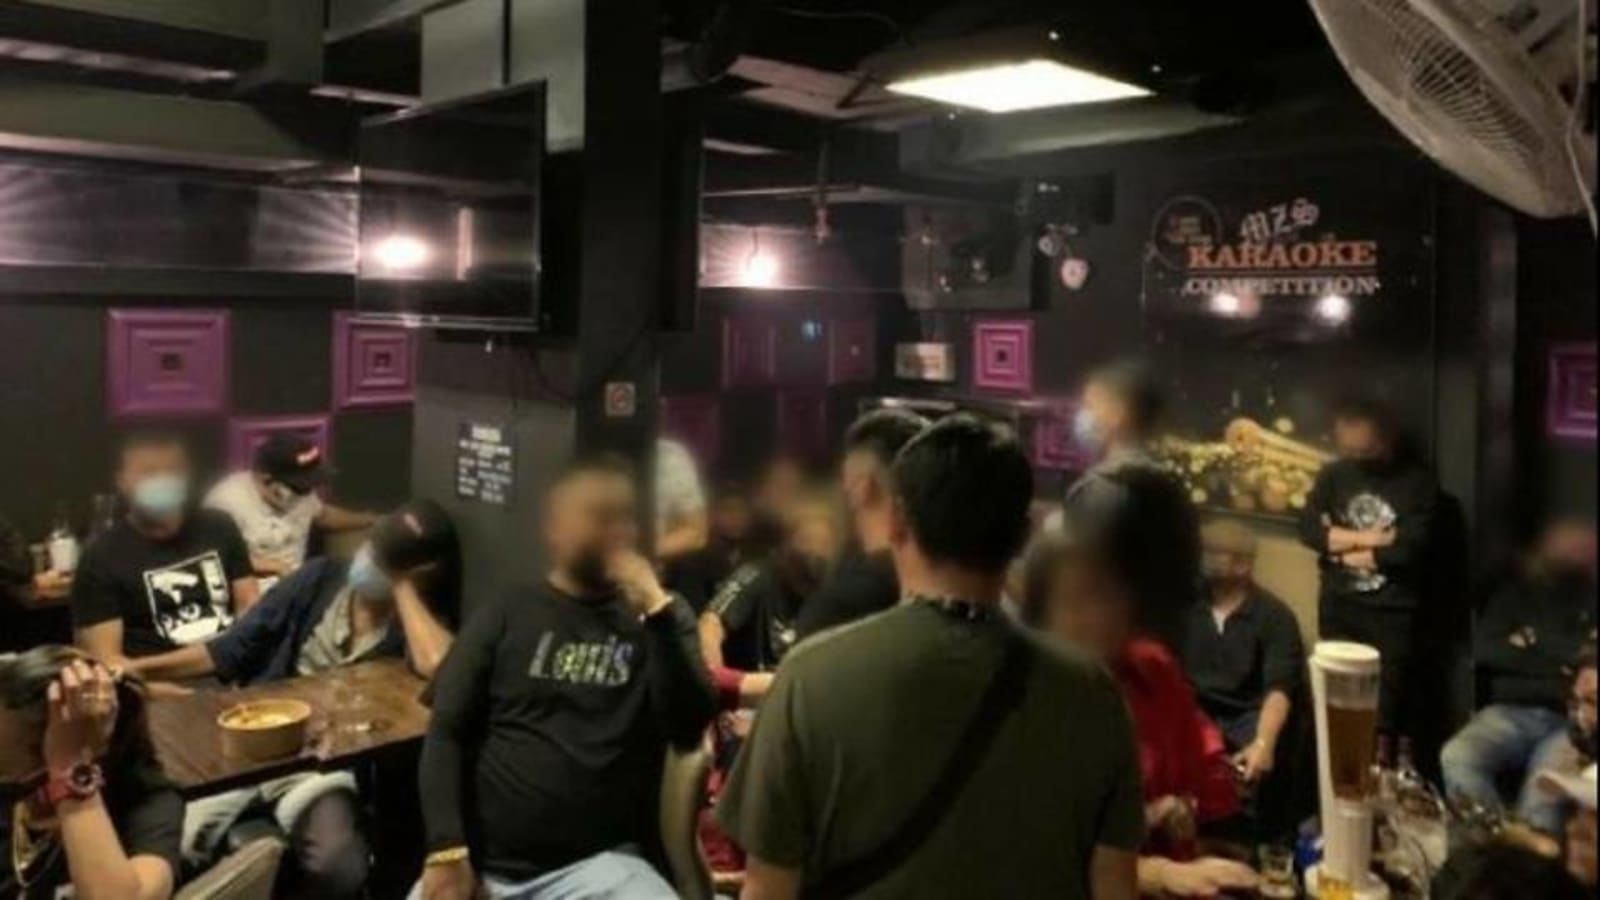 Public entertainment, liquor licences of 9 nightlife and F&B outlets revoked over COVID-19 breaches